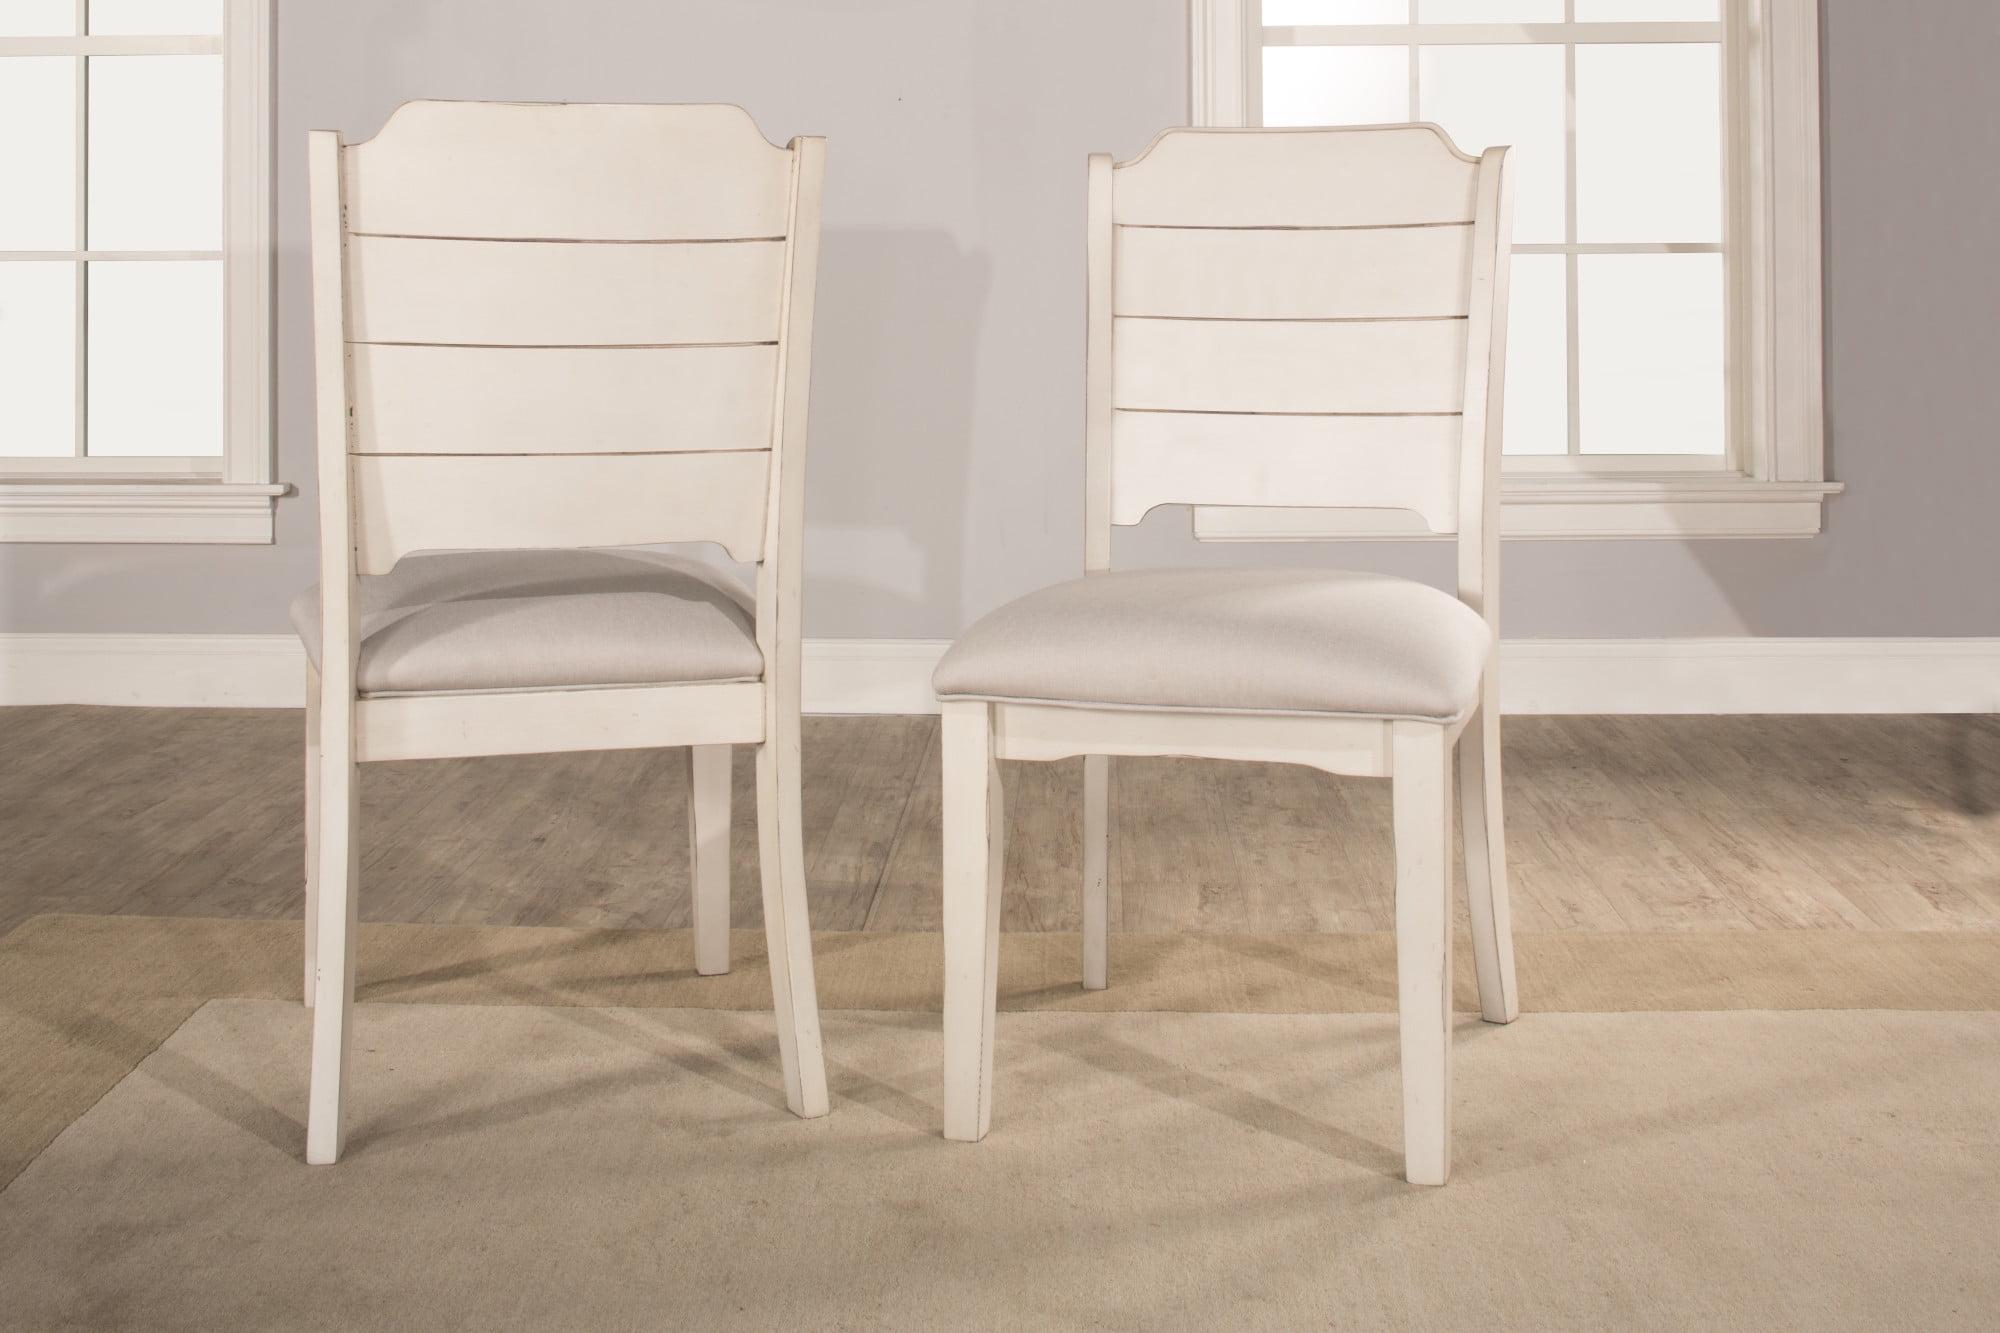 Clarion Sea White Swivel Dining Chair with Metal Accents, Set of 2